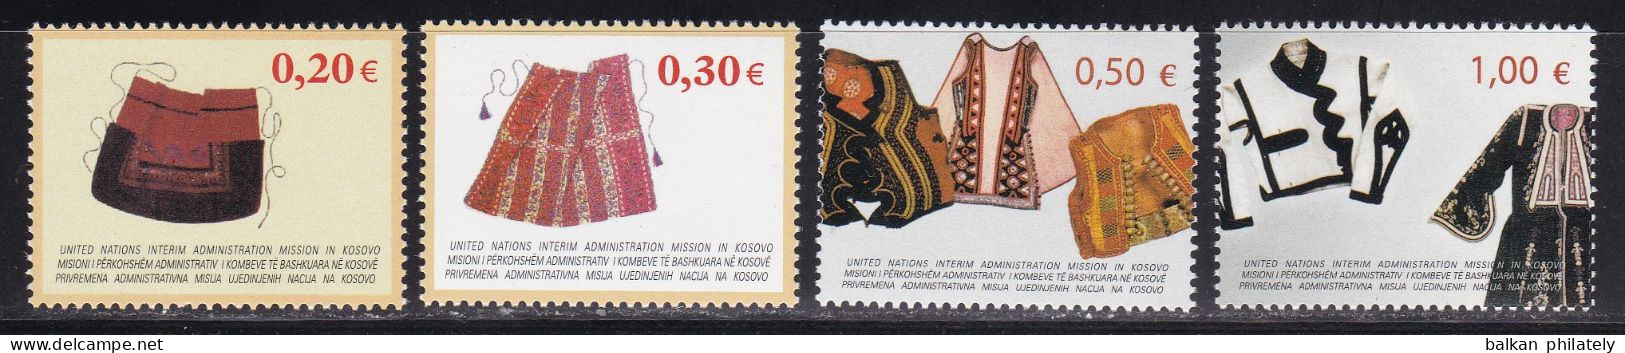 Kosovo 2004 National Clothes Cultures Costumes Embroidered Apron Vests UNMIK UN United Nations MNH - Nuevos